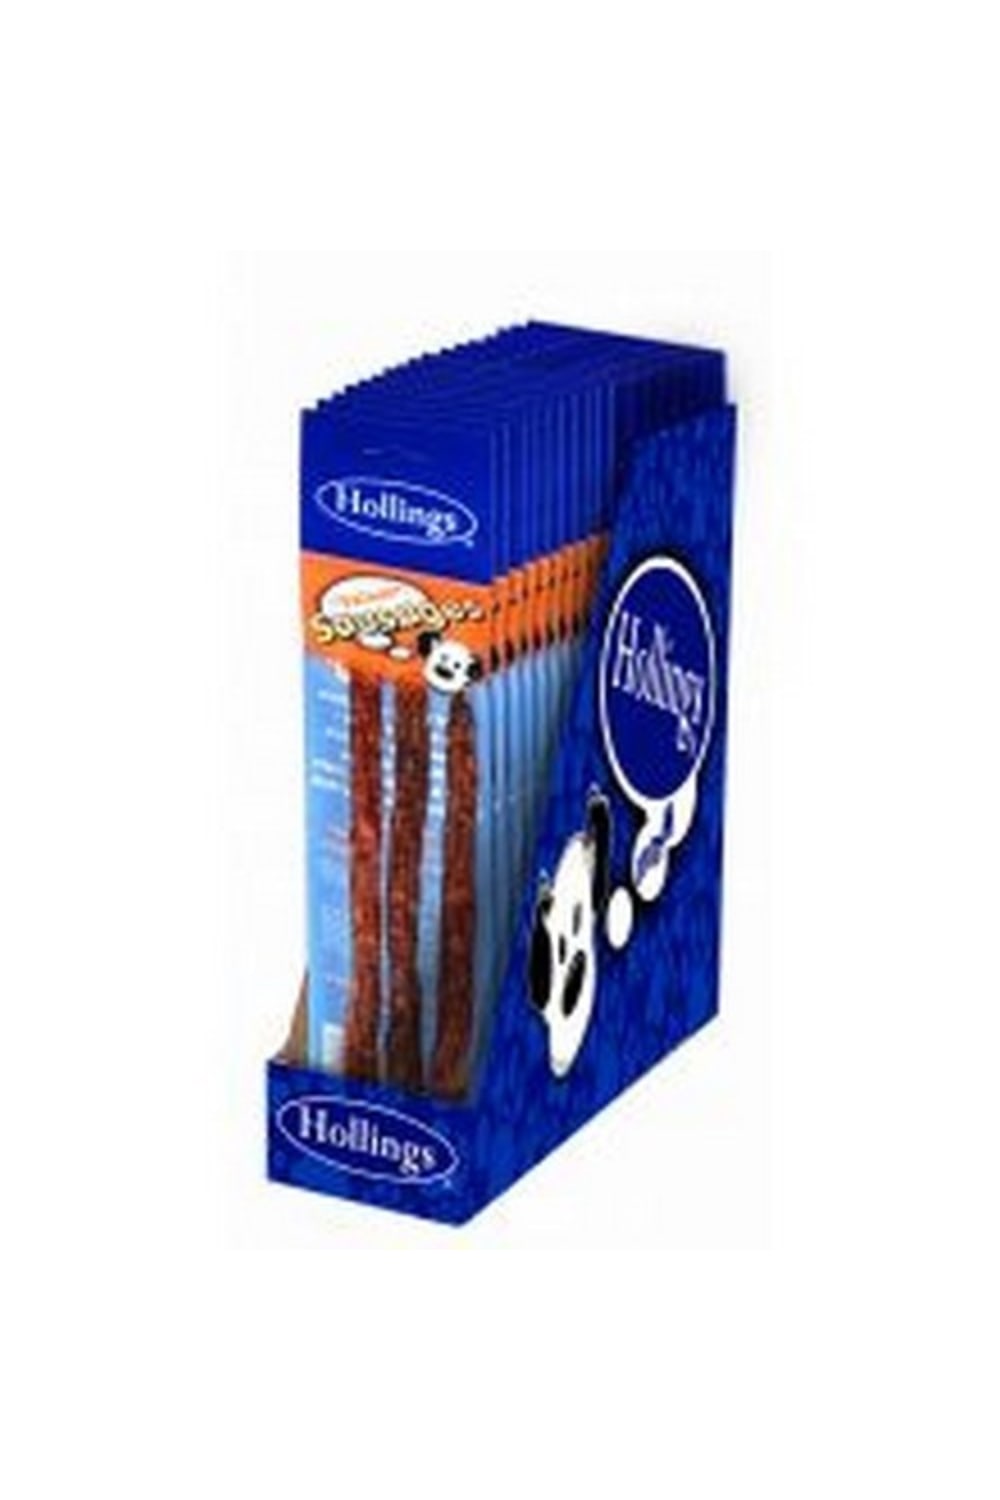 Hollings Salami Sausage Dog Treats 3 Pack (May Vary) (One Size)